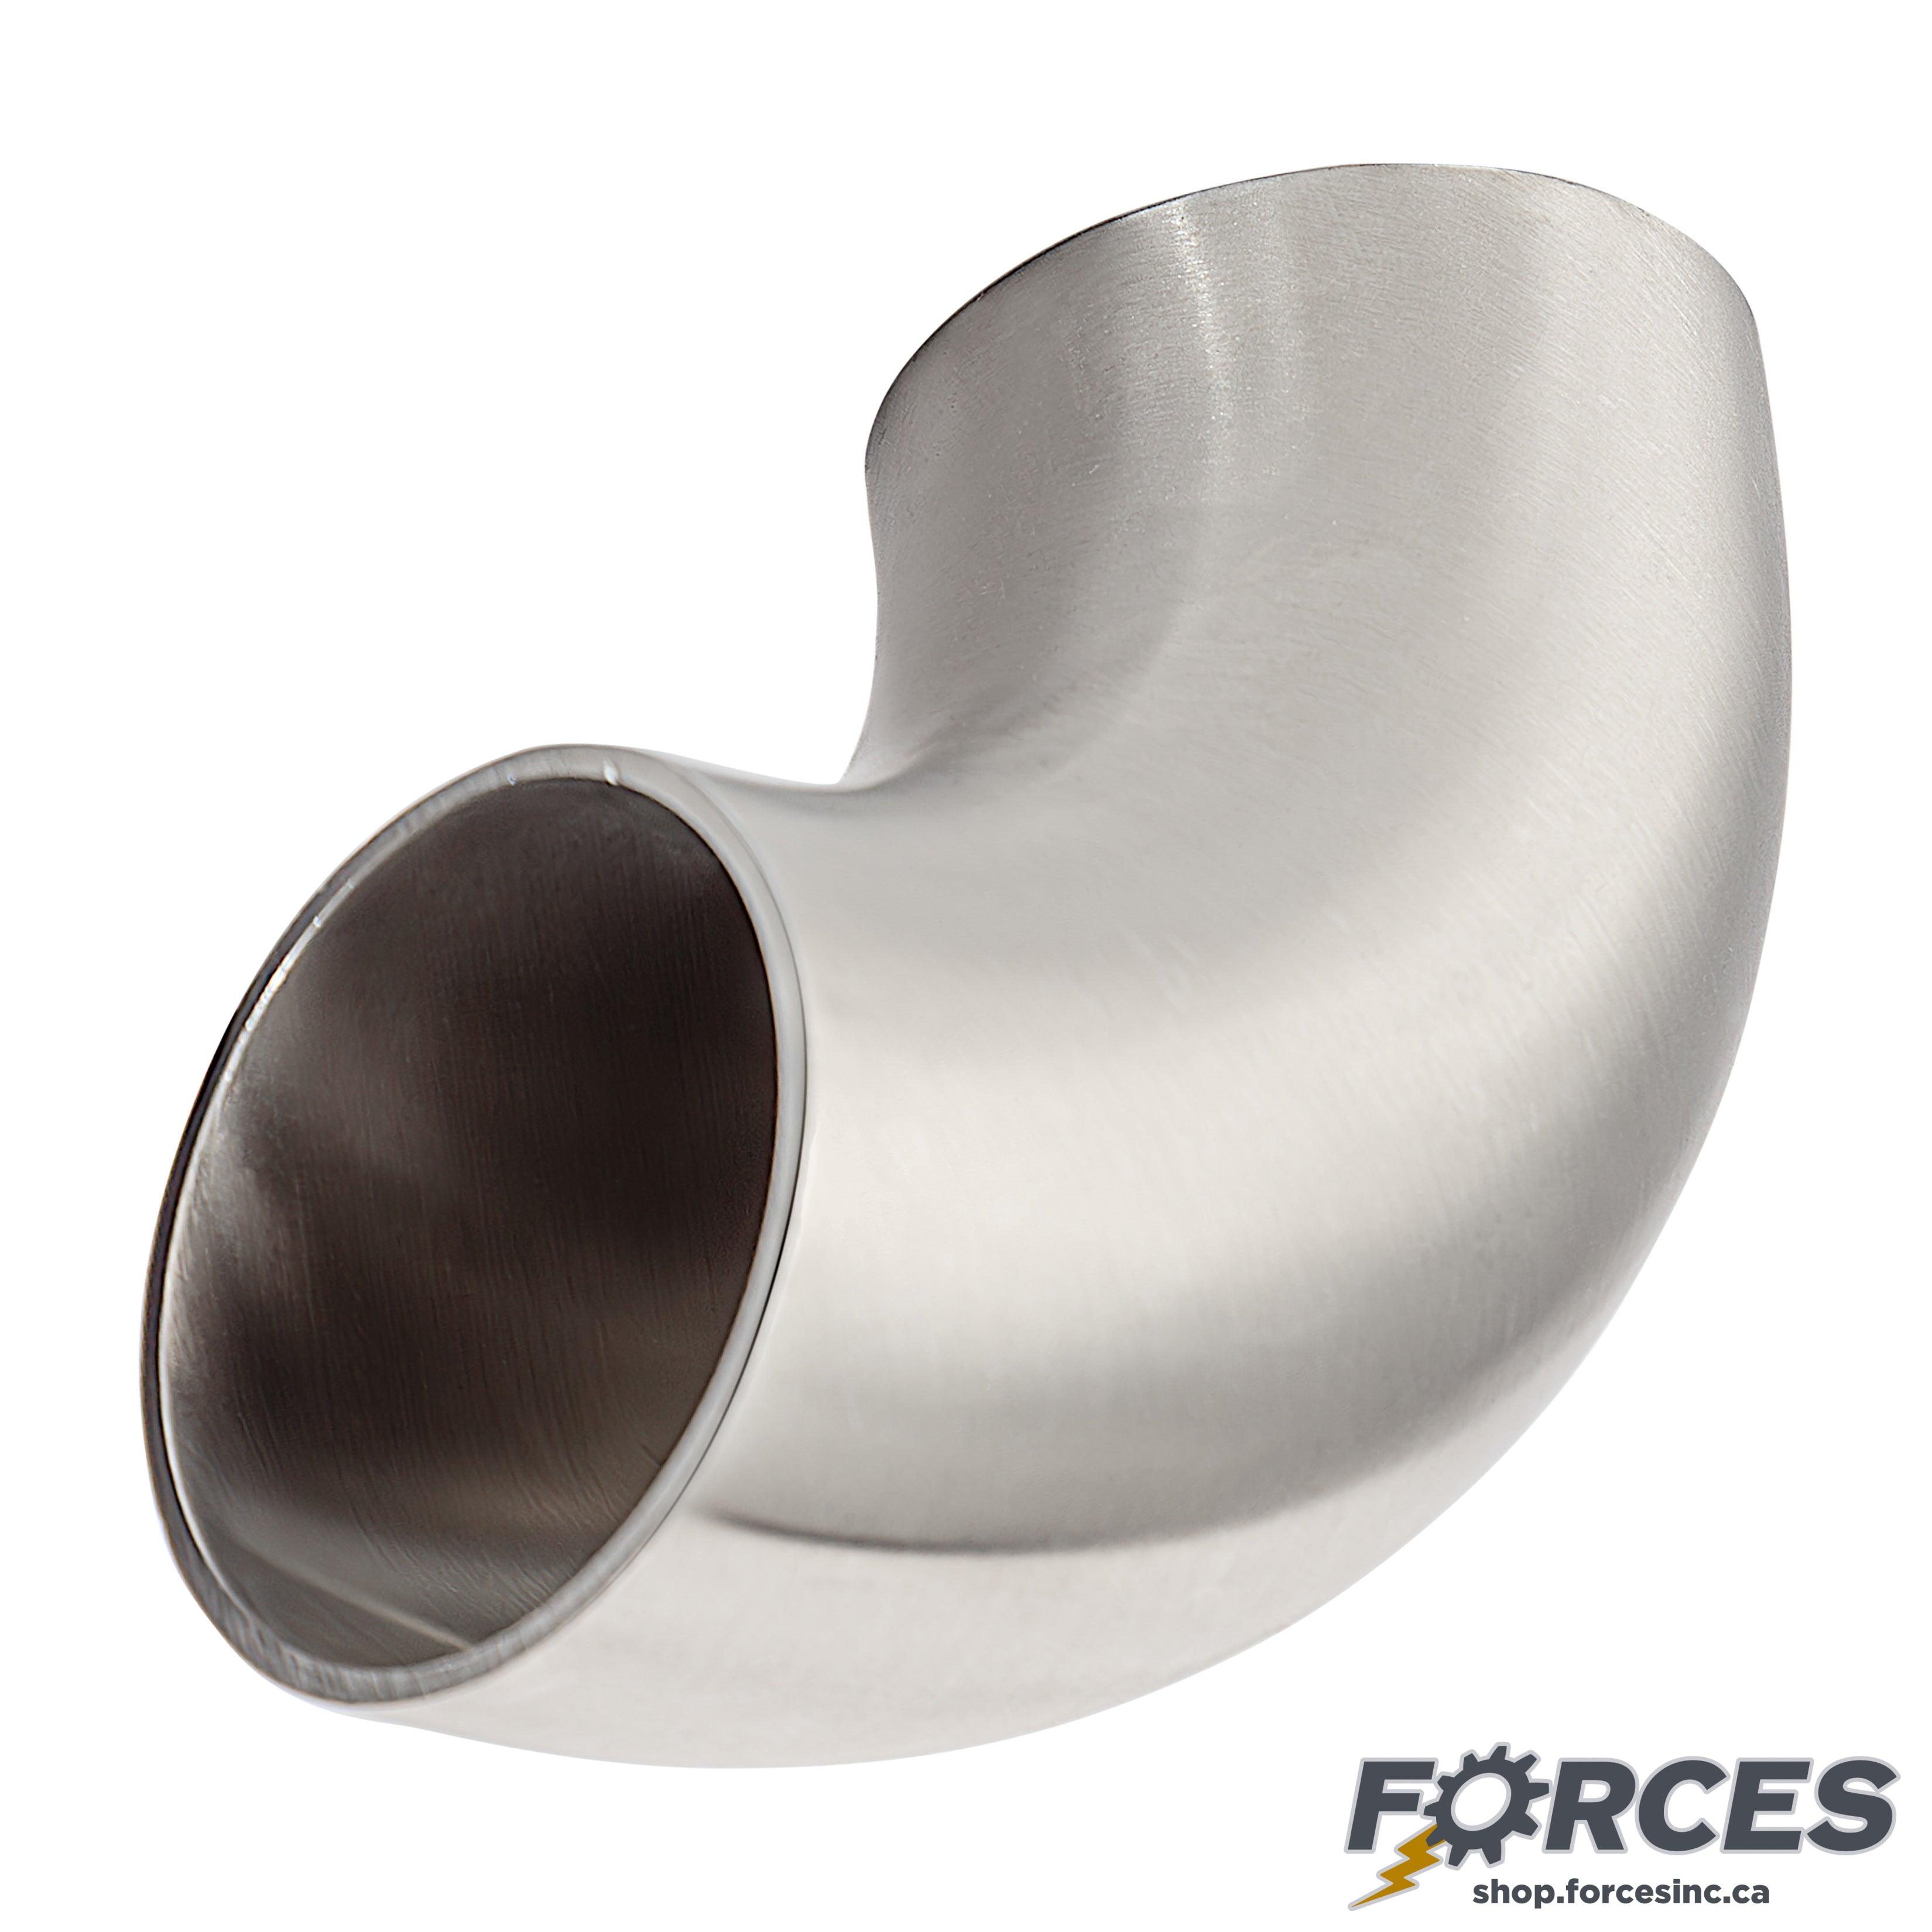 2-1/2" Butt Weld 90° Elbow - Stainless Steel 304 - Forces Inc